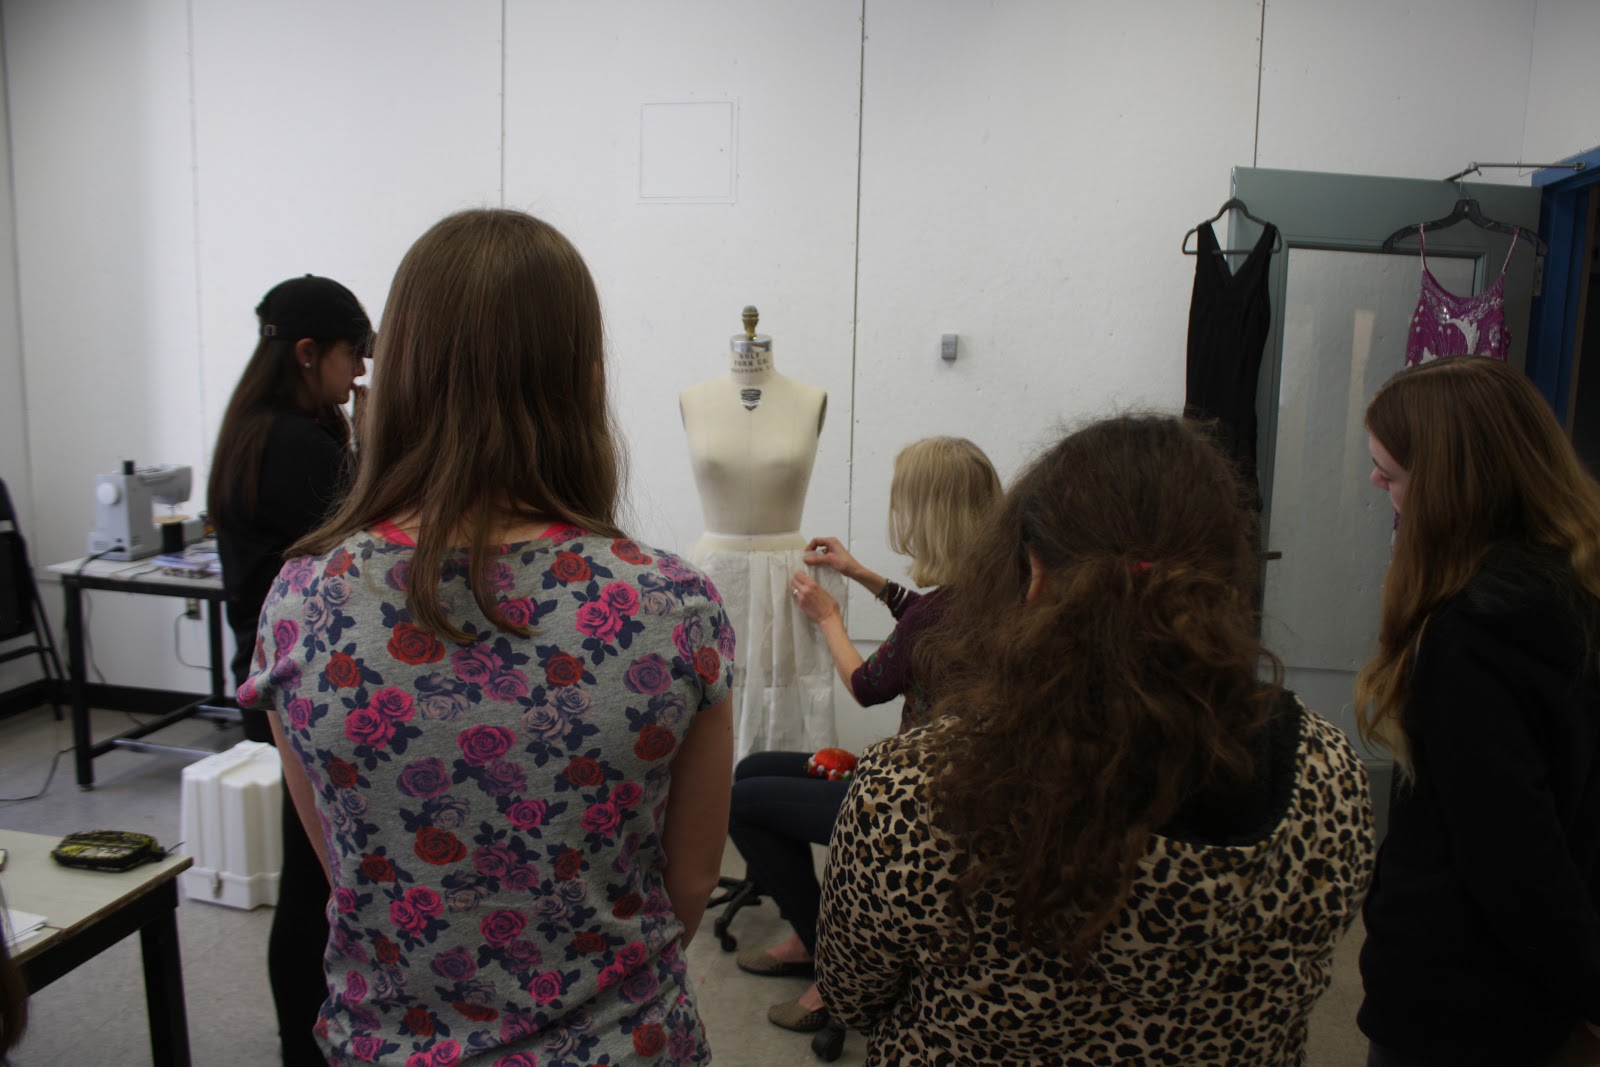 Teens gathered around a woman using a dressmaking model.